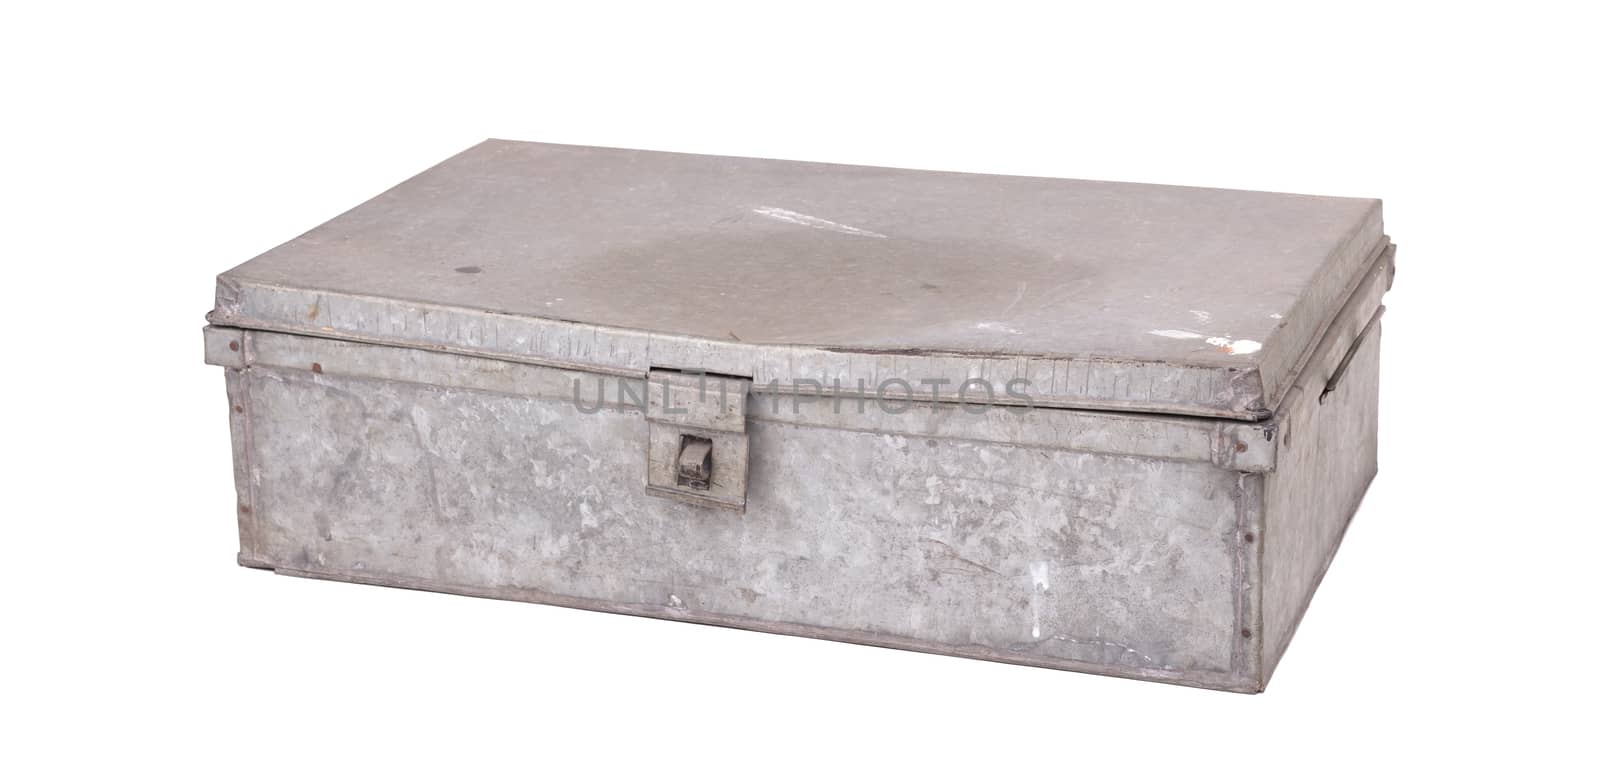 Old metal box isolated on white background by michaklootwijk